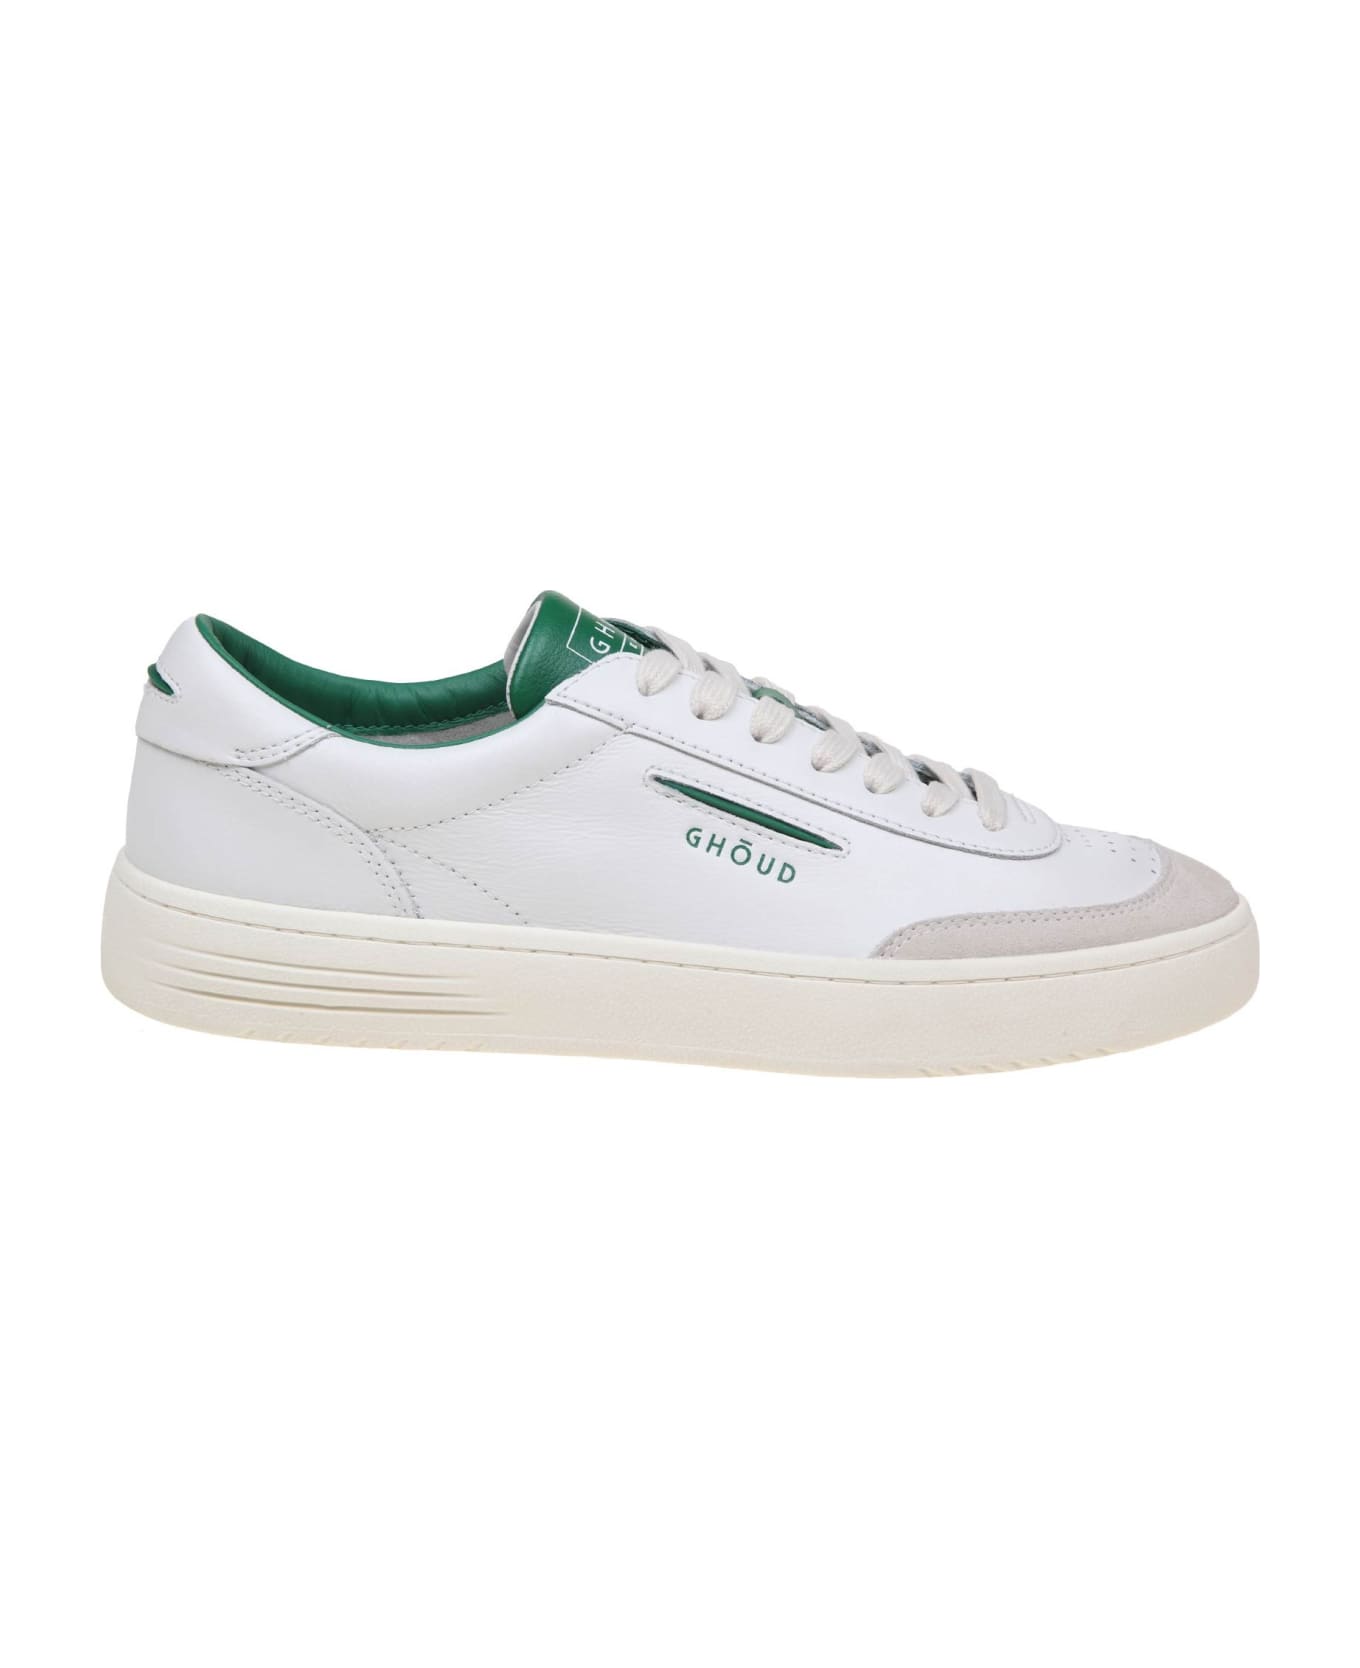 GHOUD Lido Low Sneakers In White/green Leather And Suede - leat/suede wht/grn スニーカー